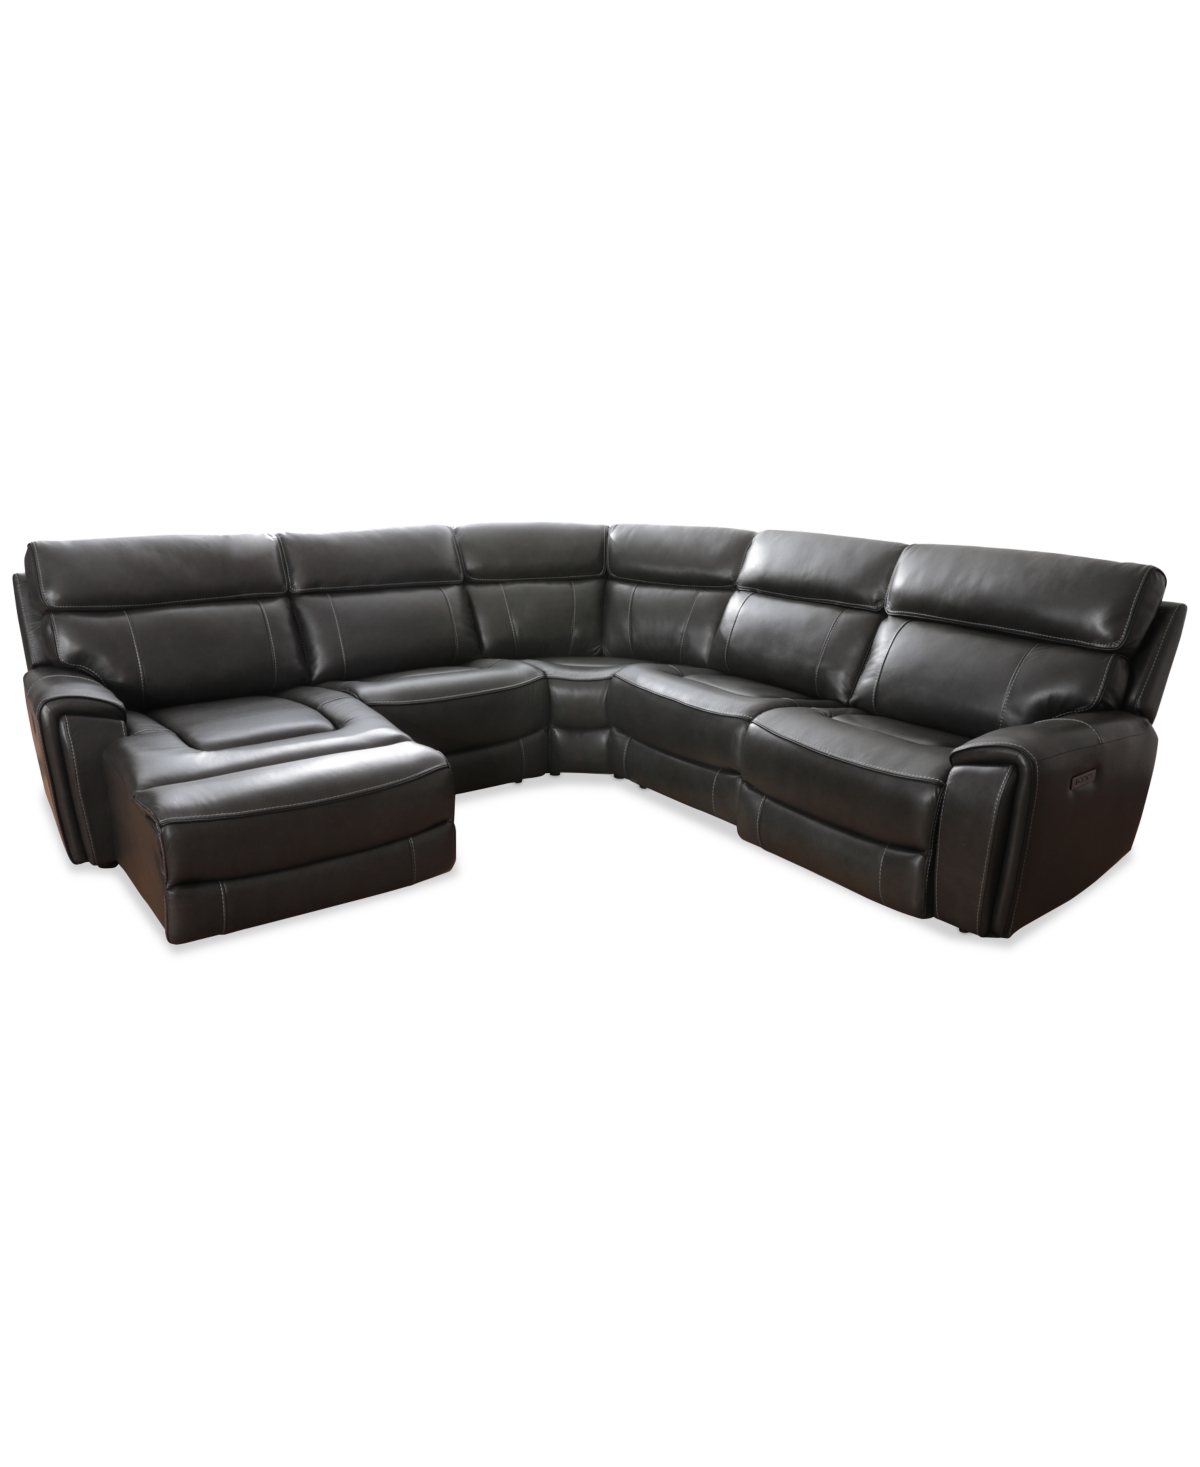 Macy's Hutchenson 119.5" 5-pc. Zero Gravity Leather Sectional With 2 Power Recliners And Chaise, Created Fo In Grey